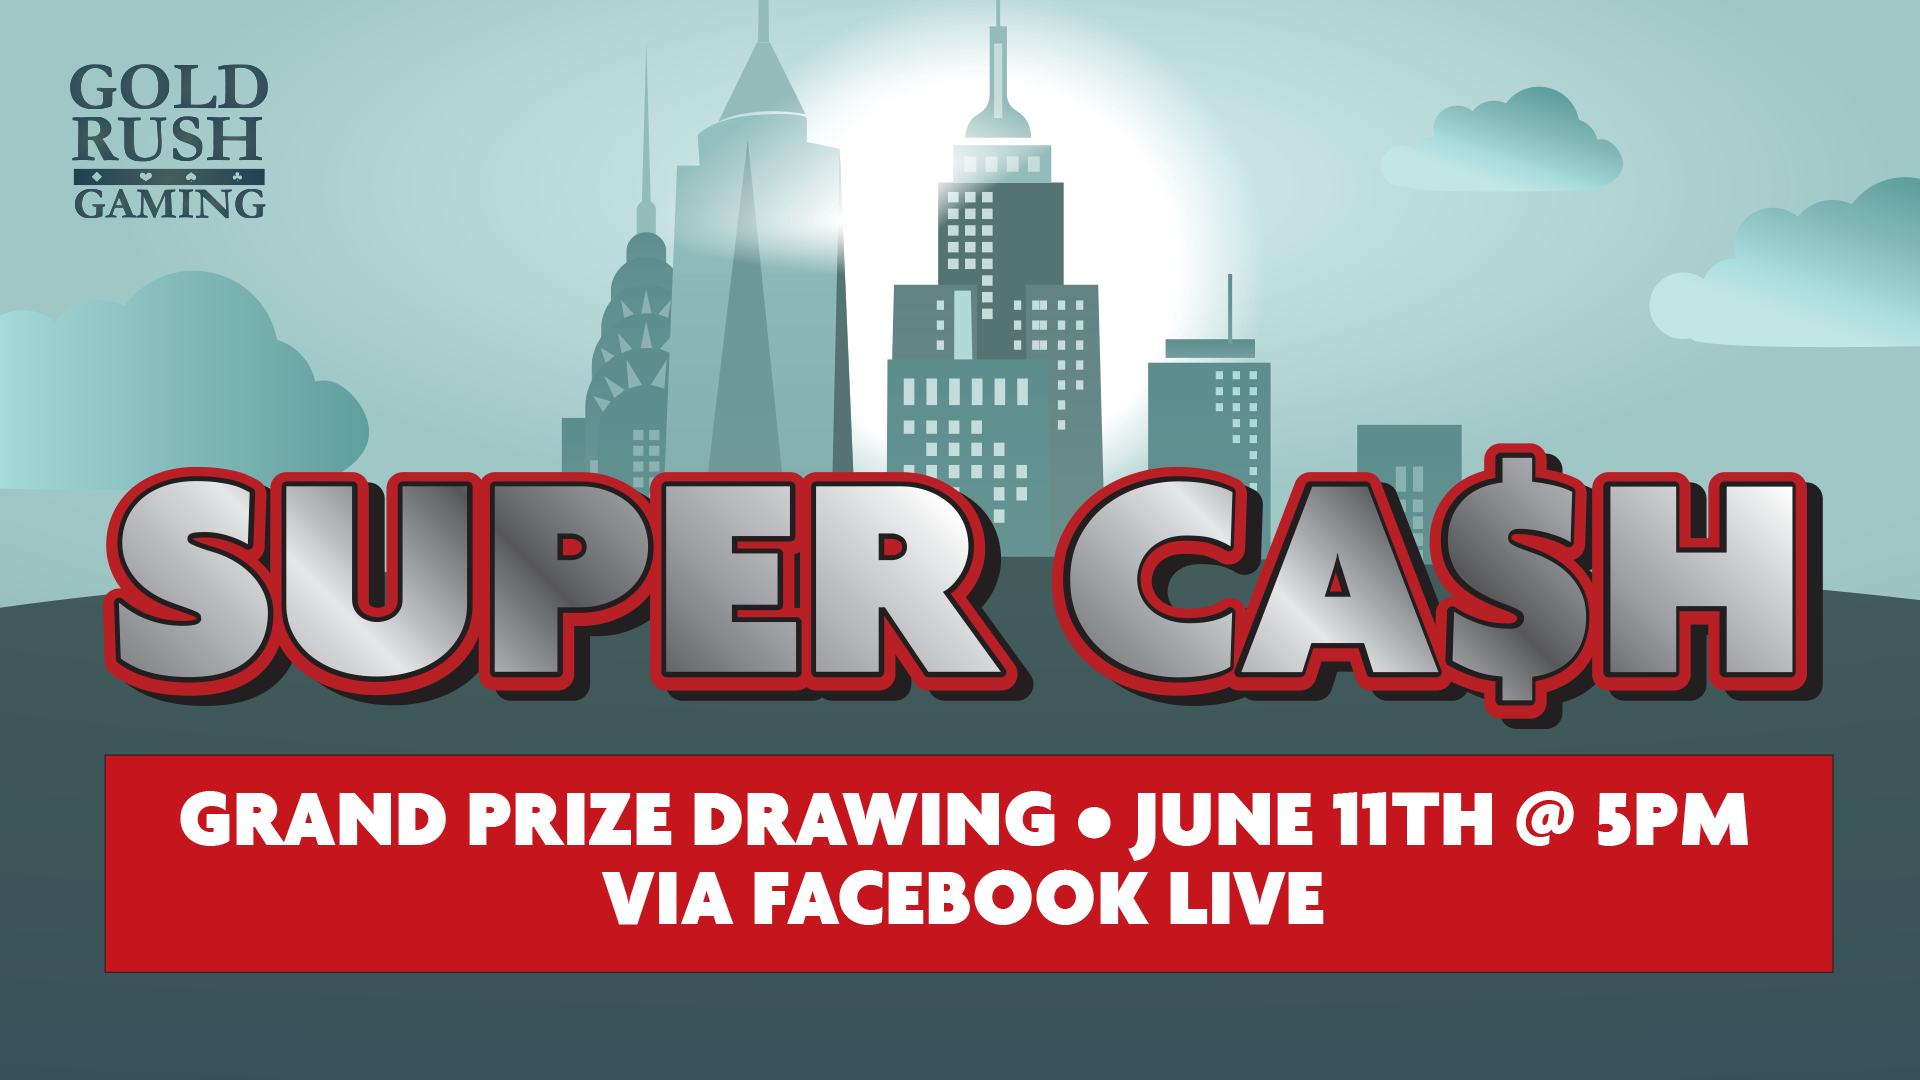 Gold Rush Gaming - Super Cash Grand Prize Drawing